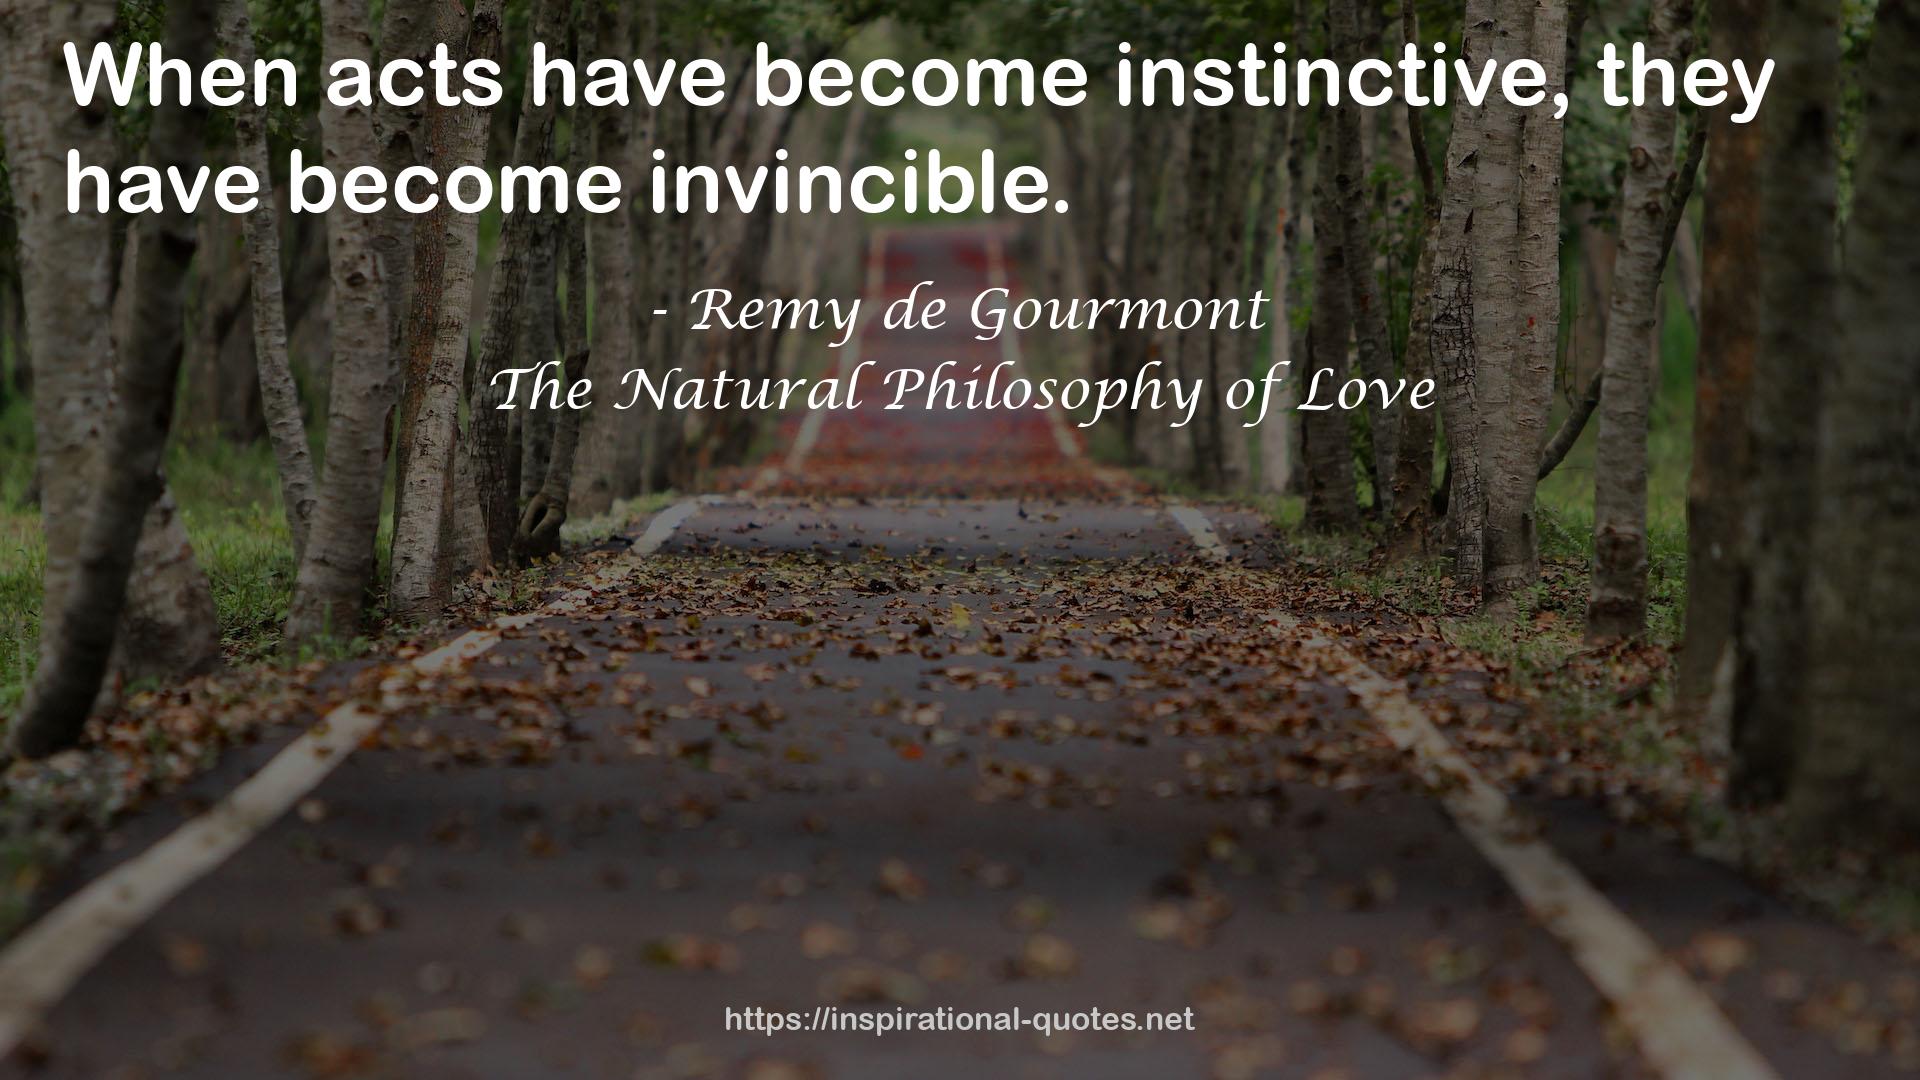 The Natural Philosophy of Love QUOTES